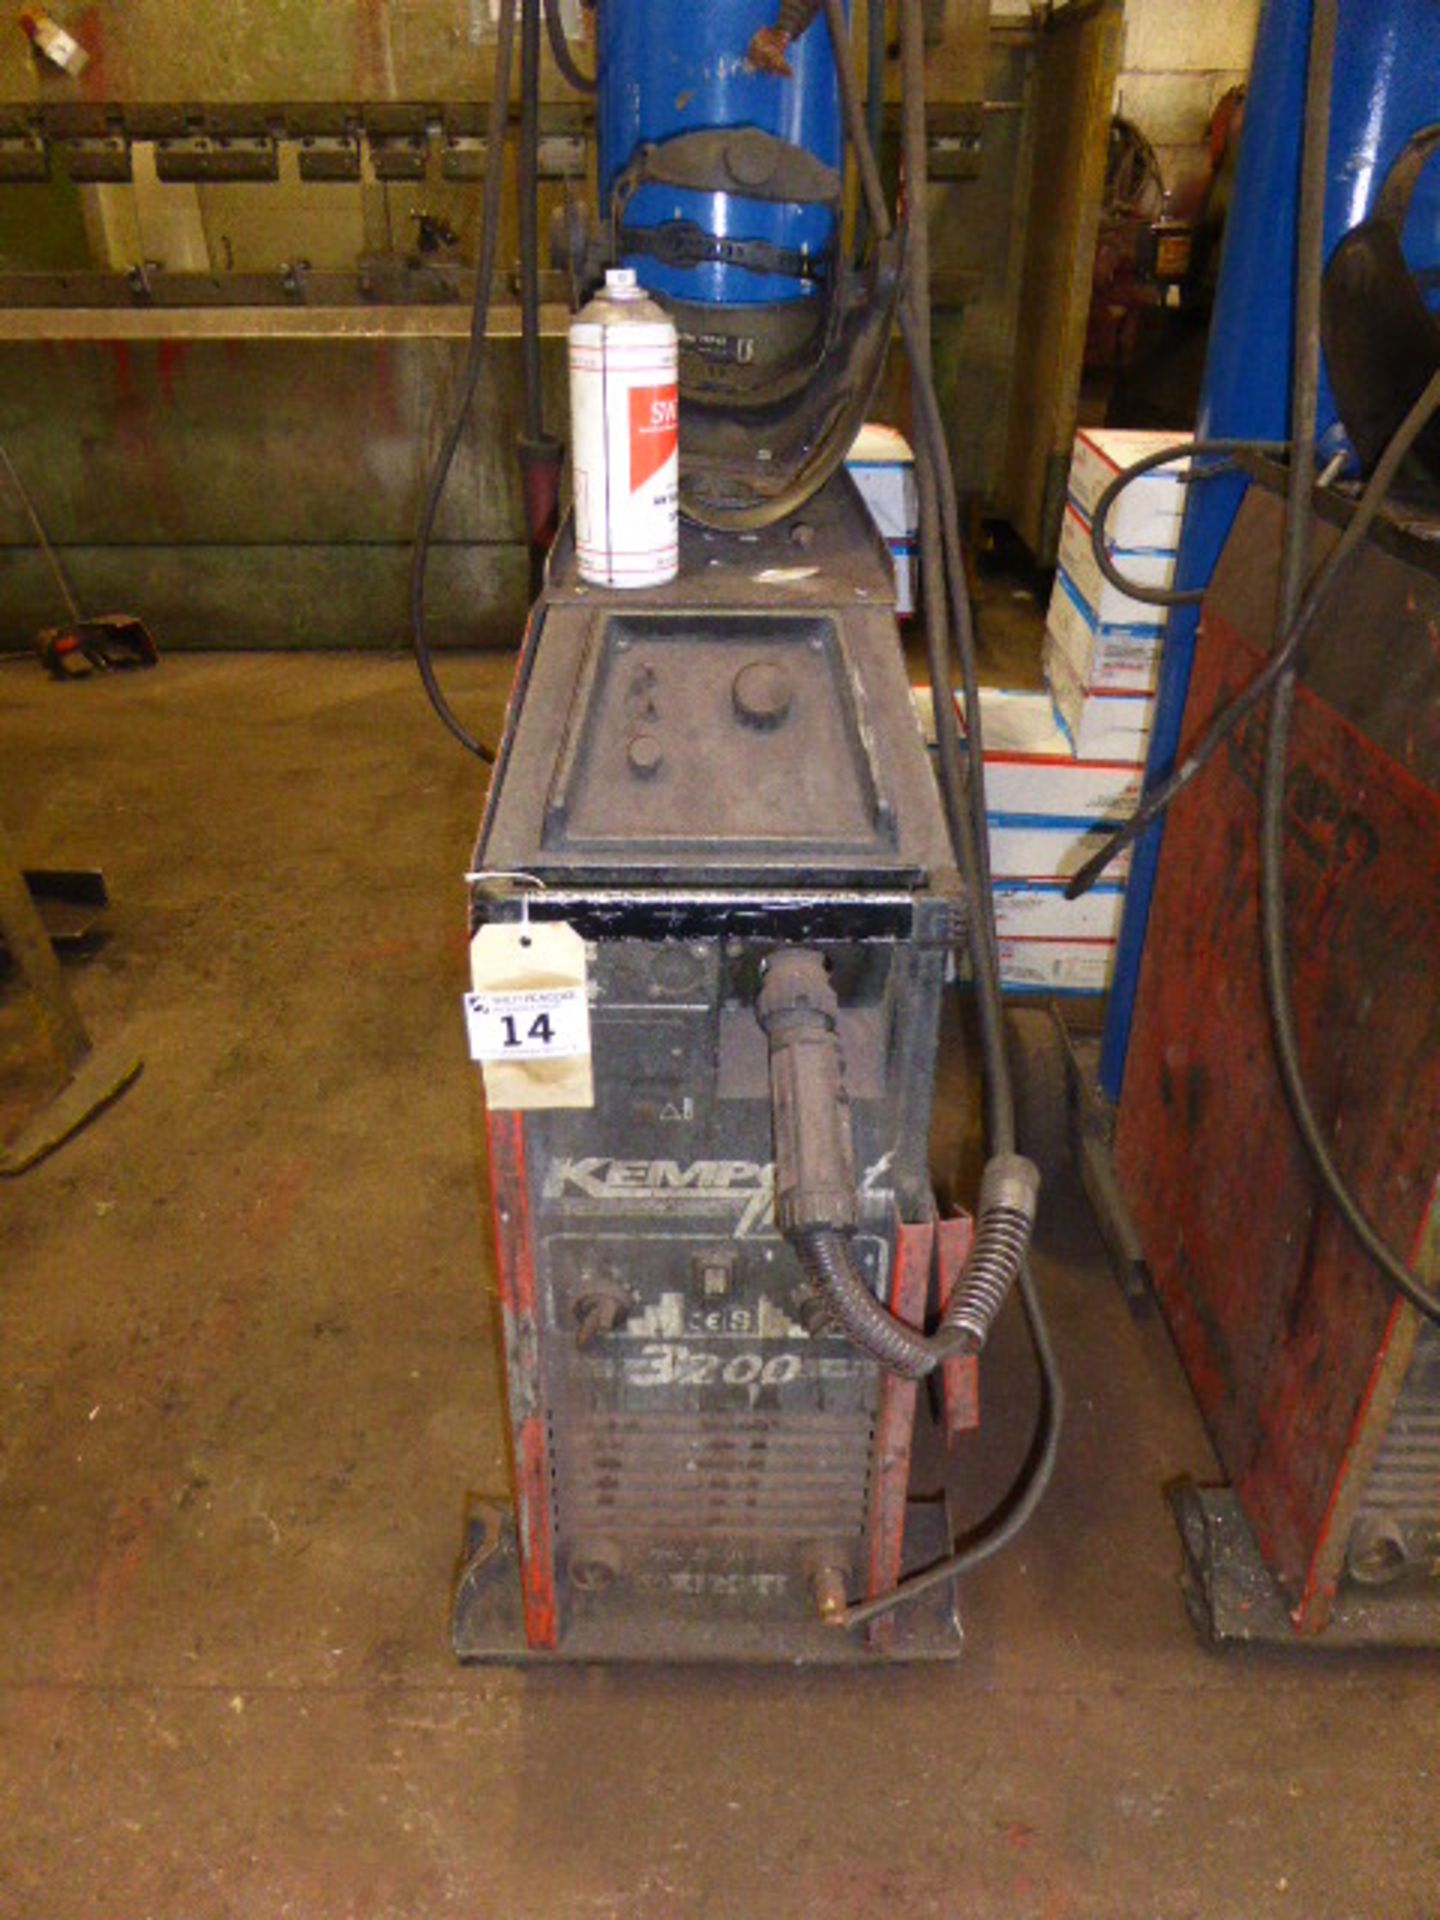 A Kemppi model Kempomat model 3200 mig welding machine with accessories, (gas bottle not included)